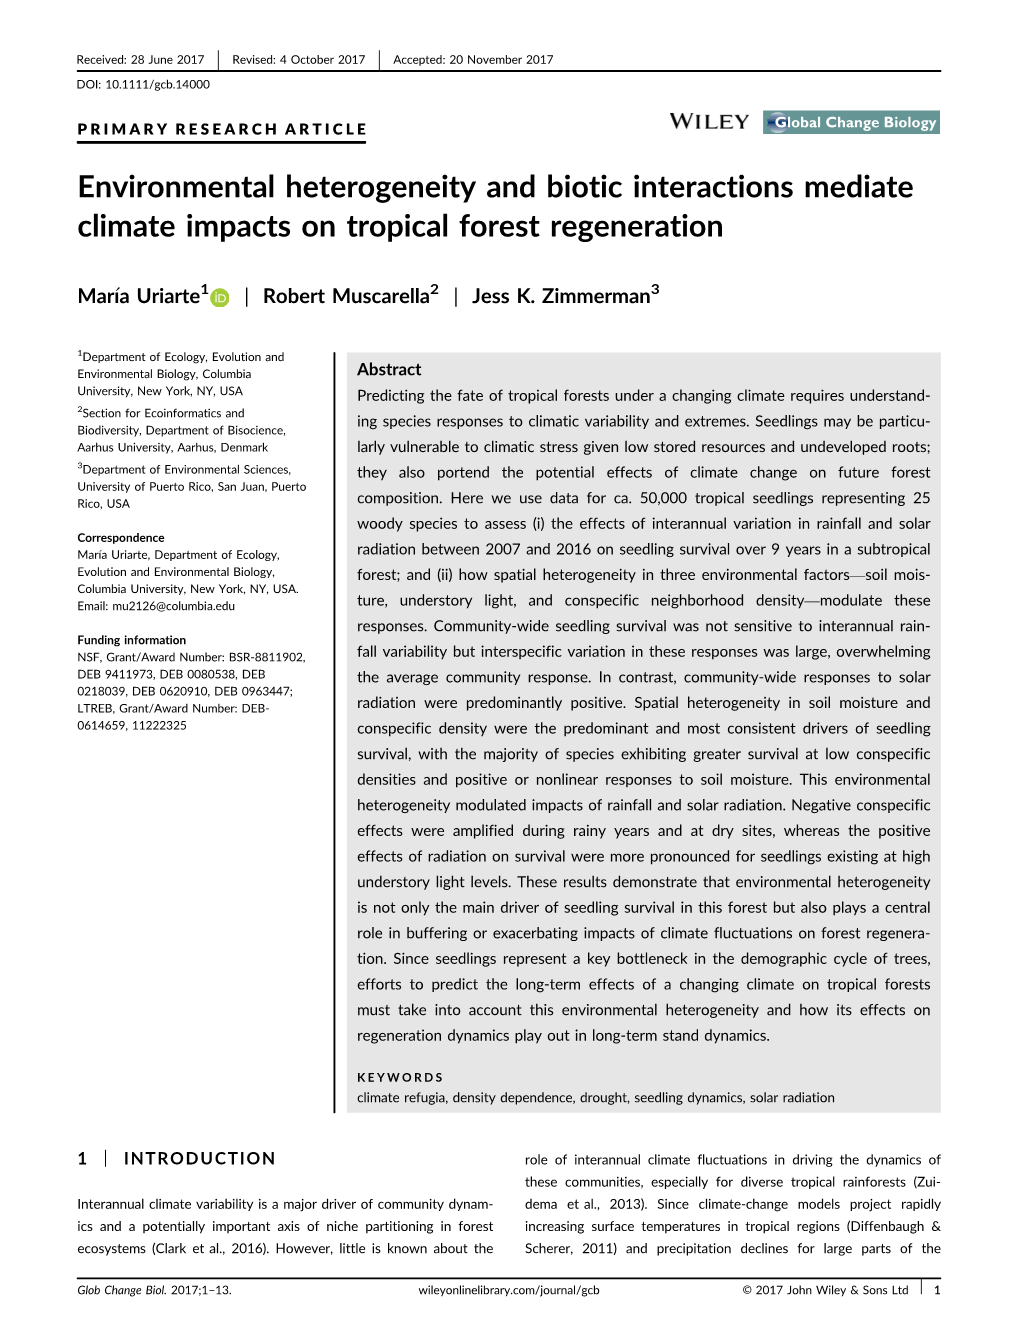 Environmental Heterogeneity and Biotic Interactions Mediate Climate Impacts on Tropical Forest Regeneration